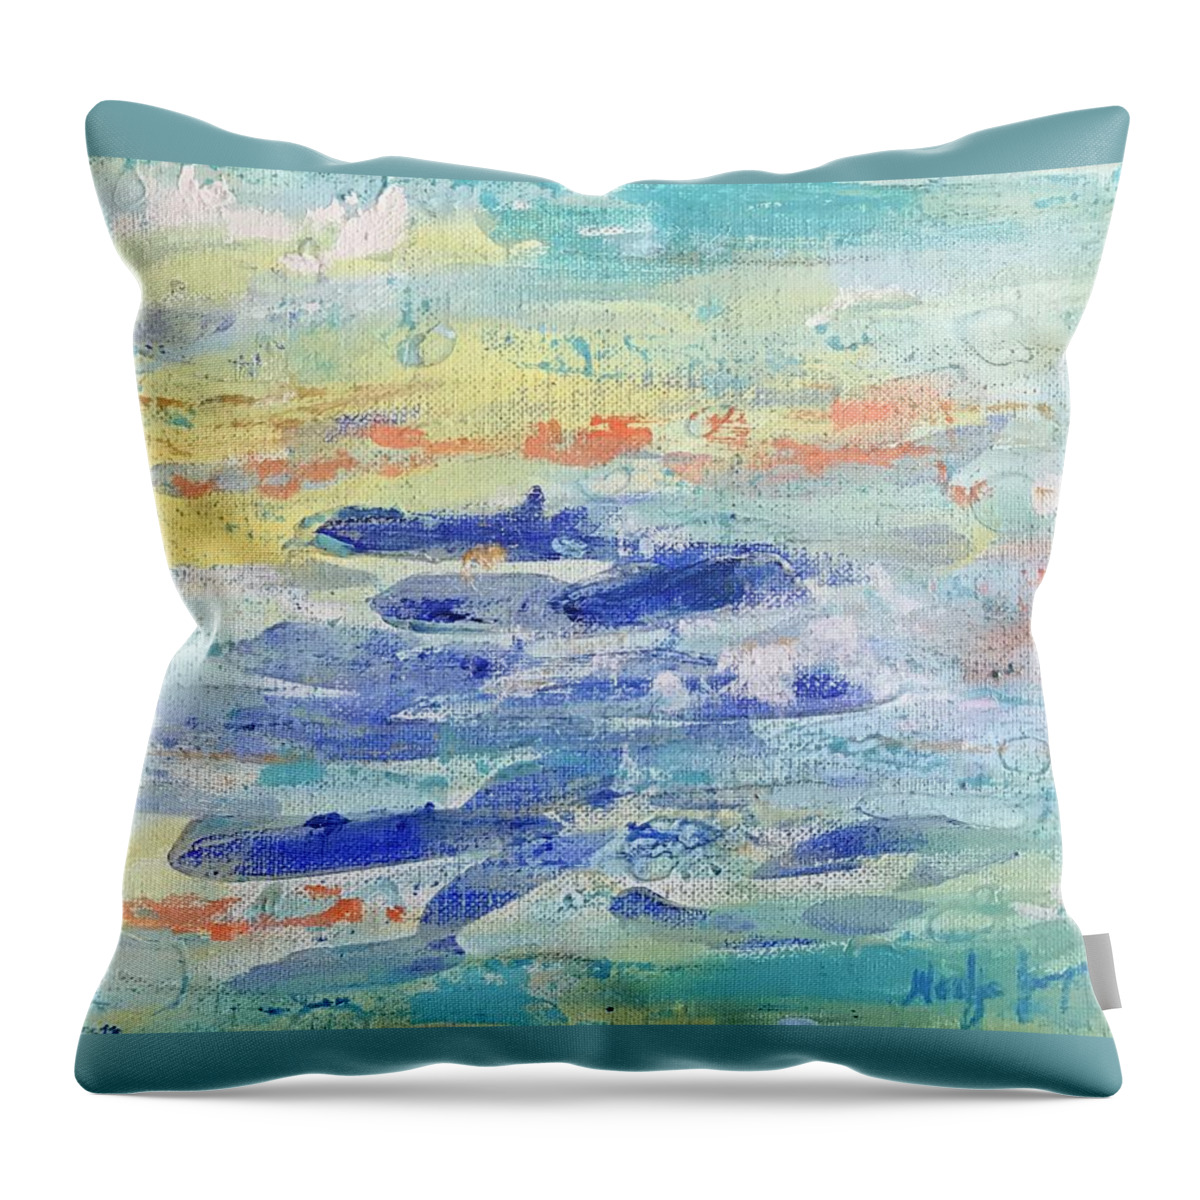 Beach Throw Pillow featuring the painting Peaceful Afternoon by Medge Jaspan